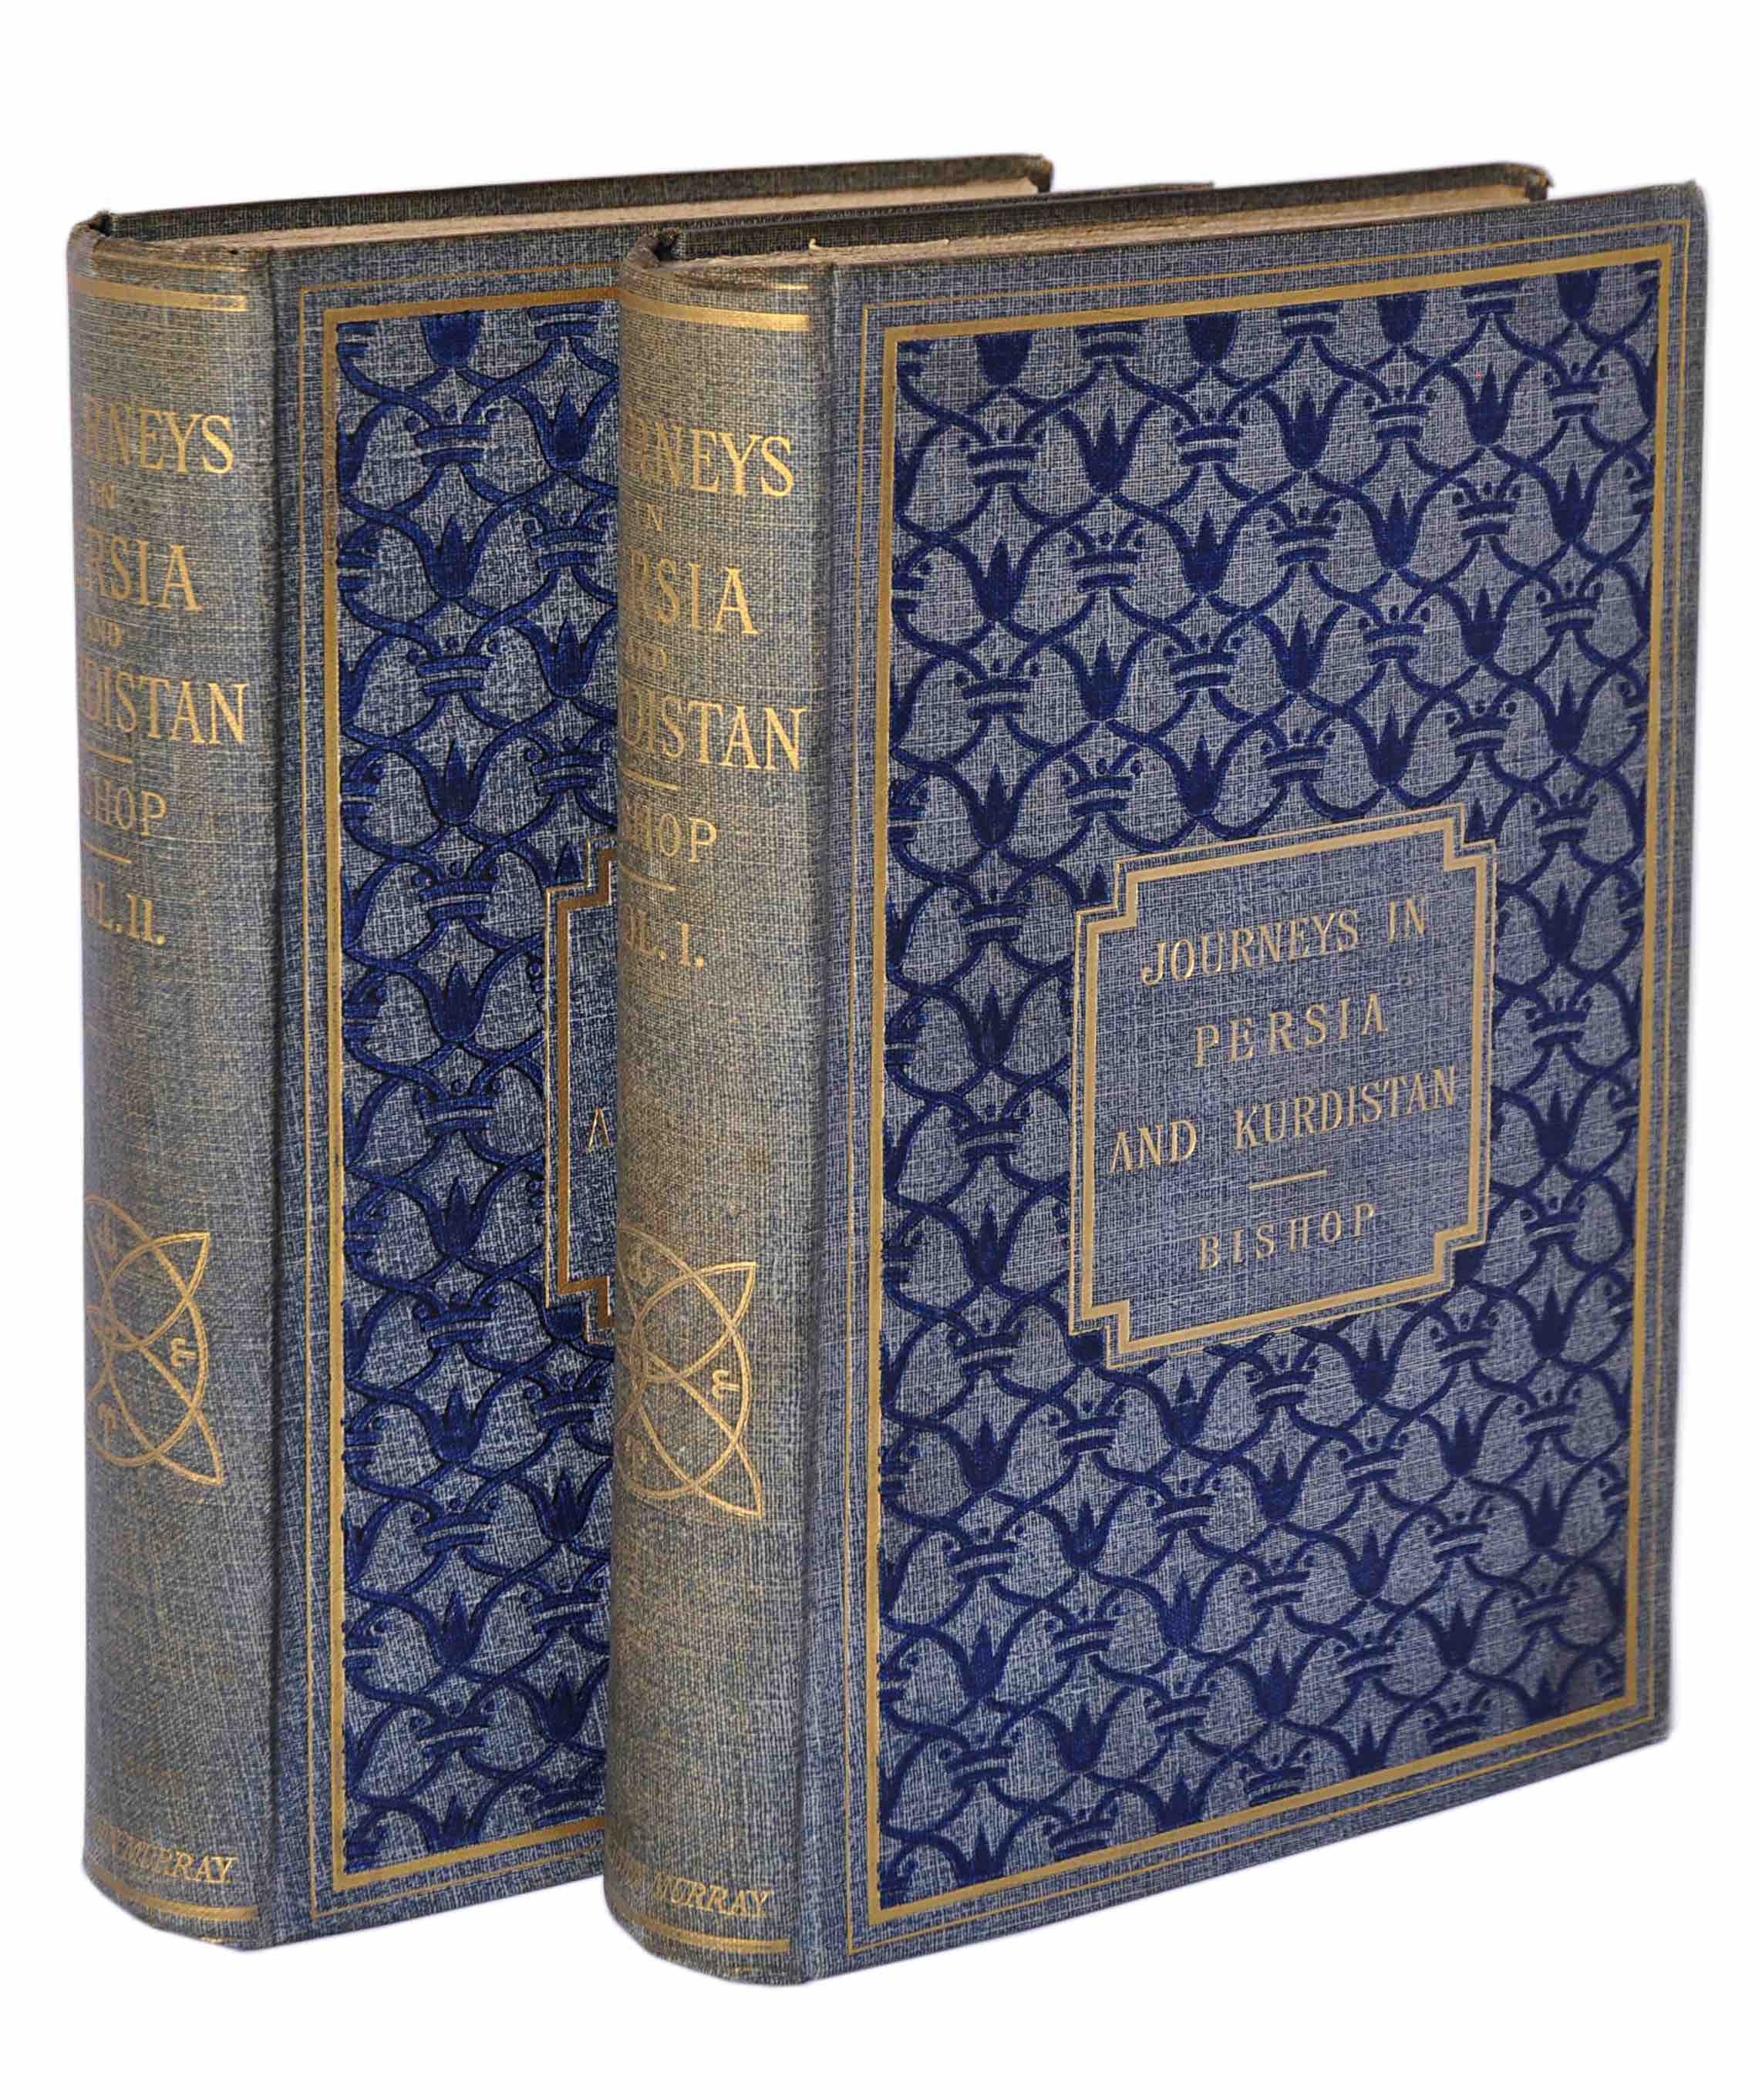 BIRD, ISABELLA LUCY (Mrs. Bishop): - Journeys in Persia and Kurdistan. Including a Summer in the Upper Karun Region and a Visit to the Nestorian Rayahs. Two volumes. London, John Murray, 1891.